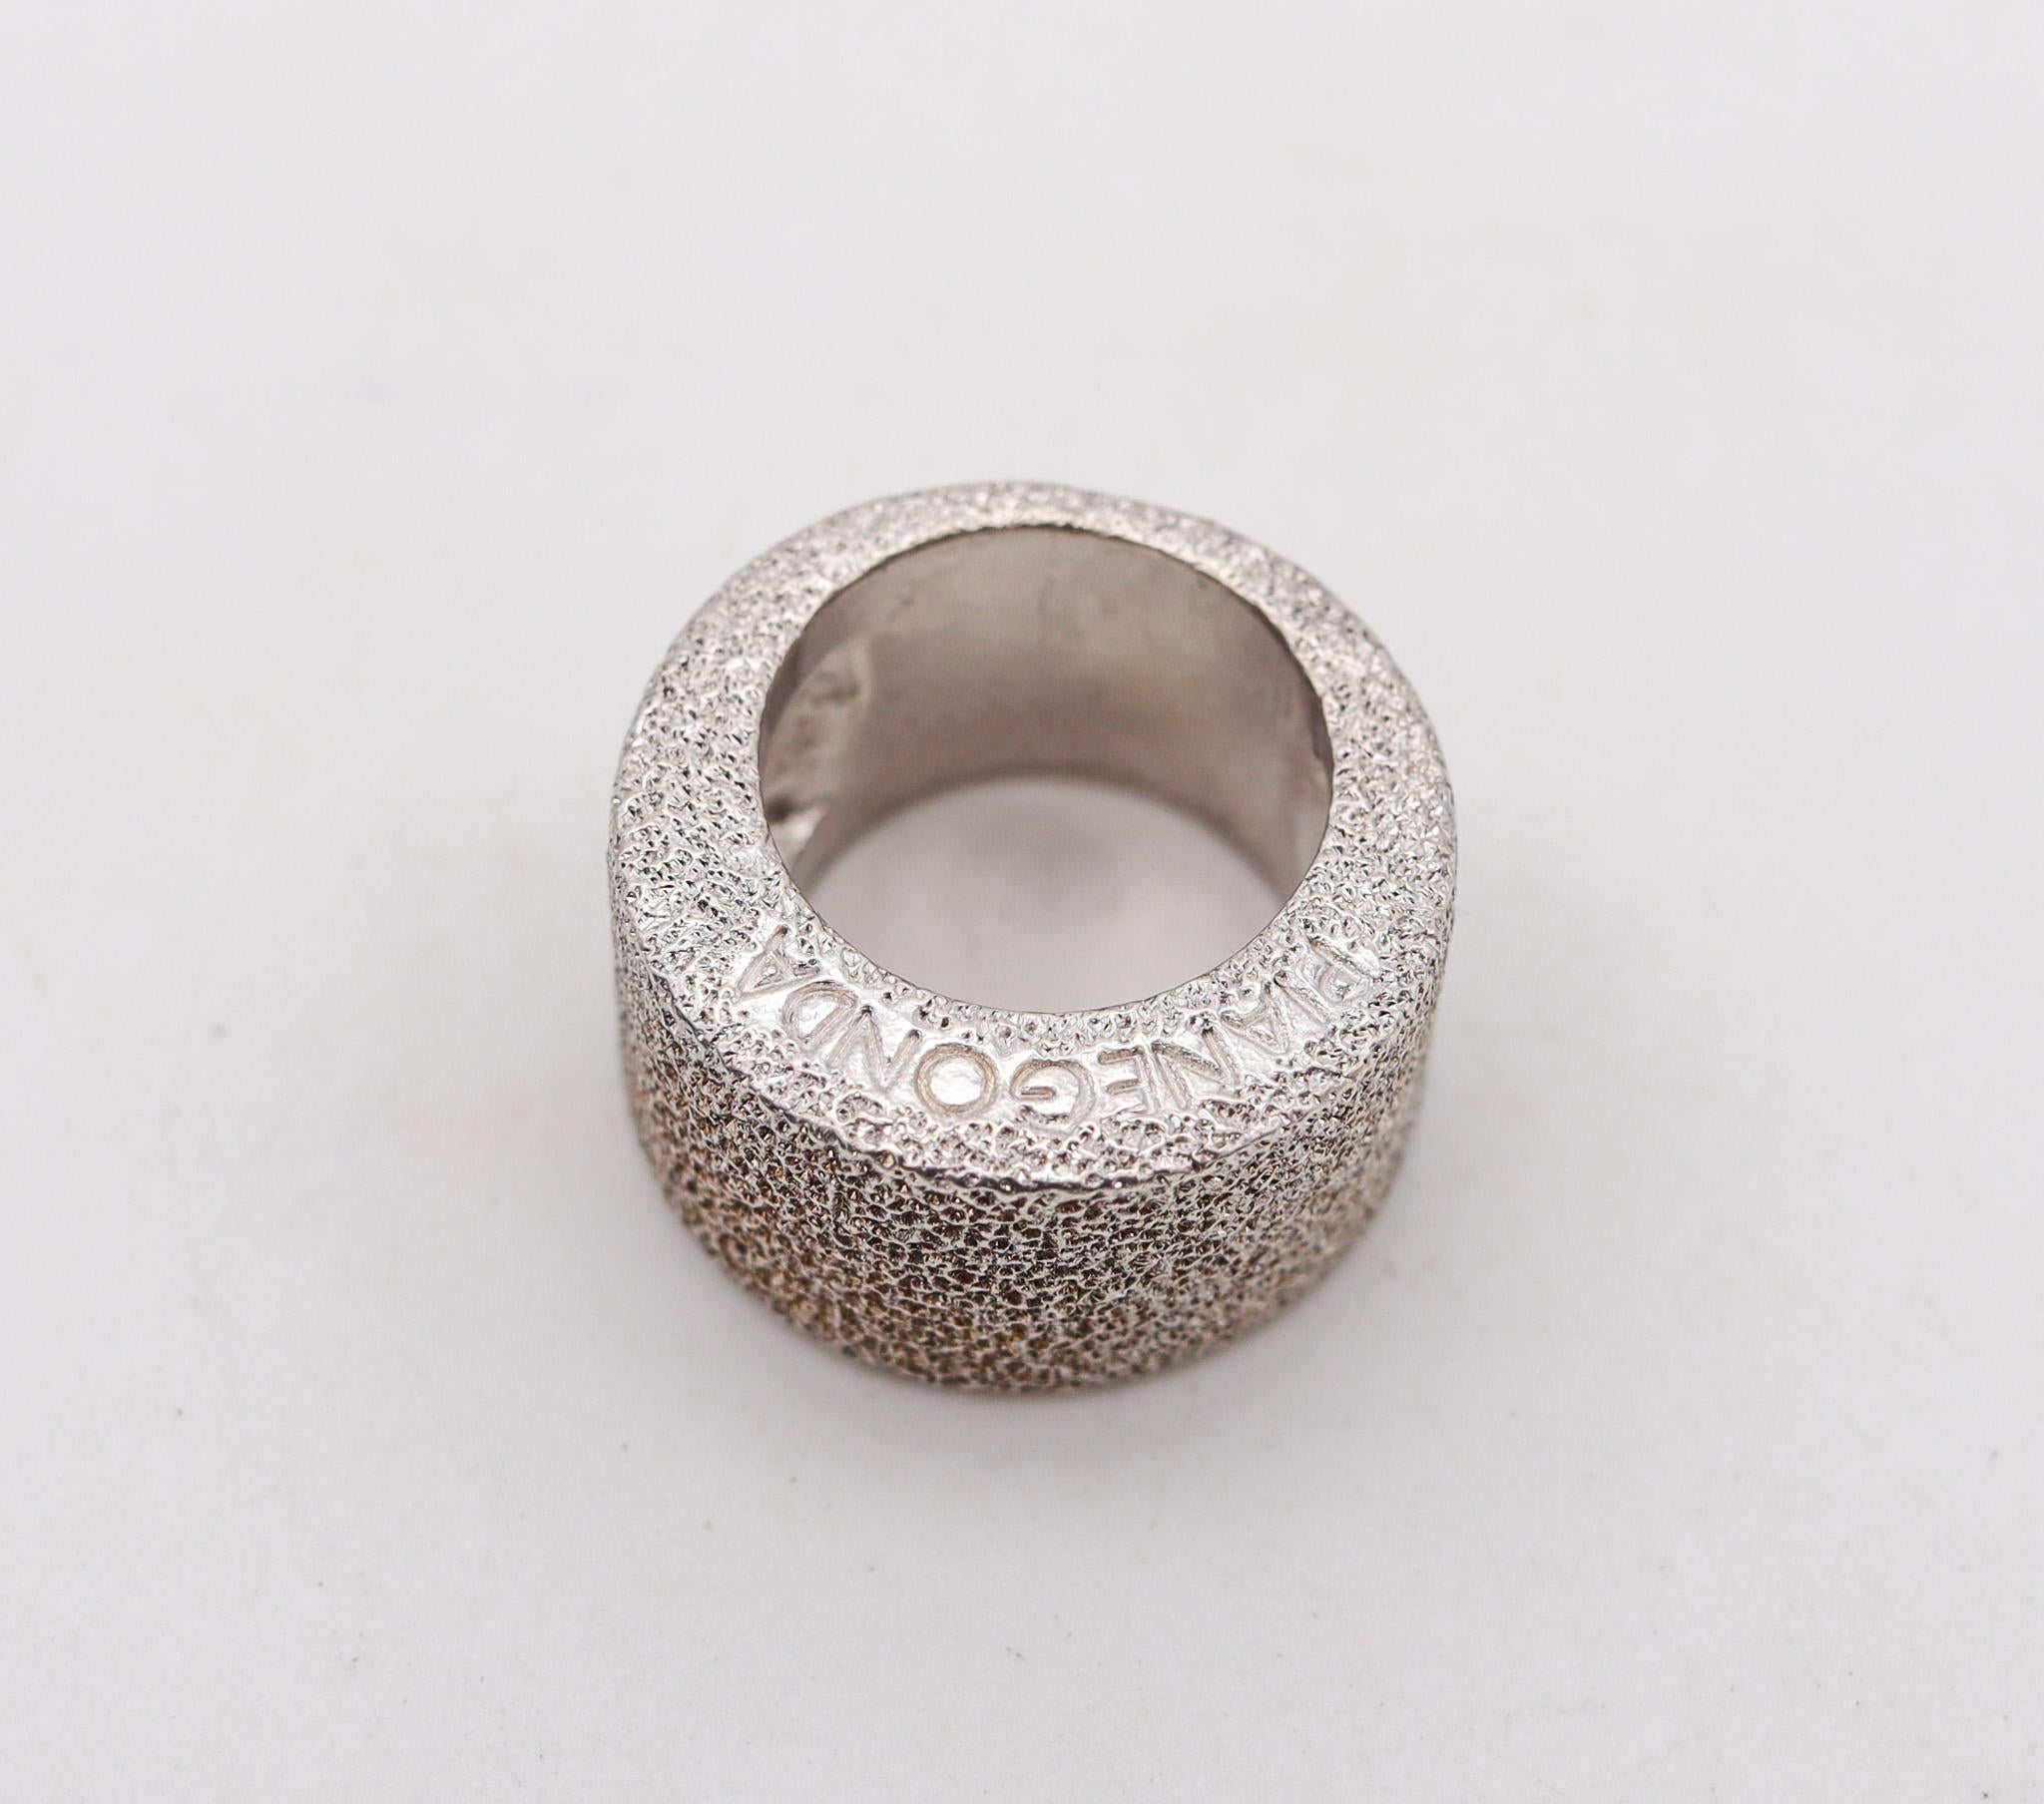 Modern Pianegonda Sculptural Band Ring In Solid Textured .925 Sterling Silver For Sale